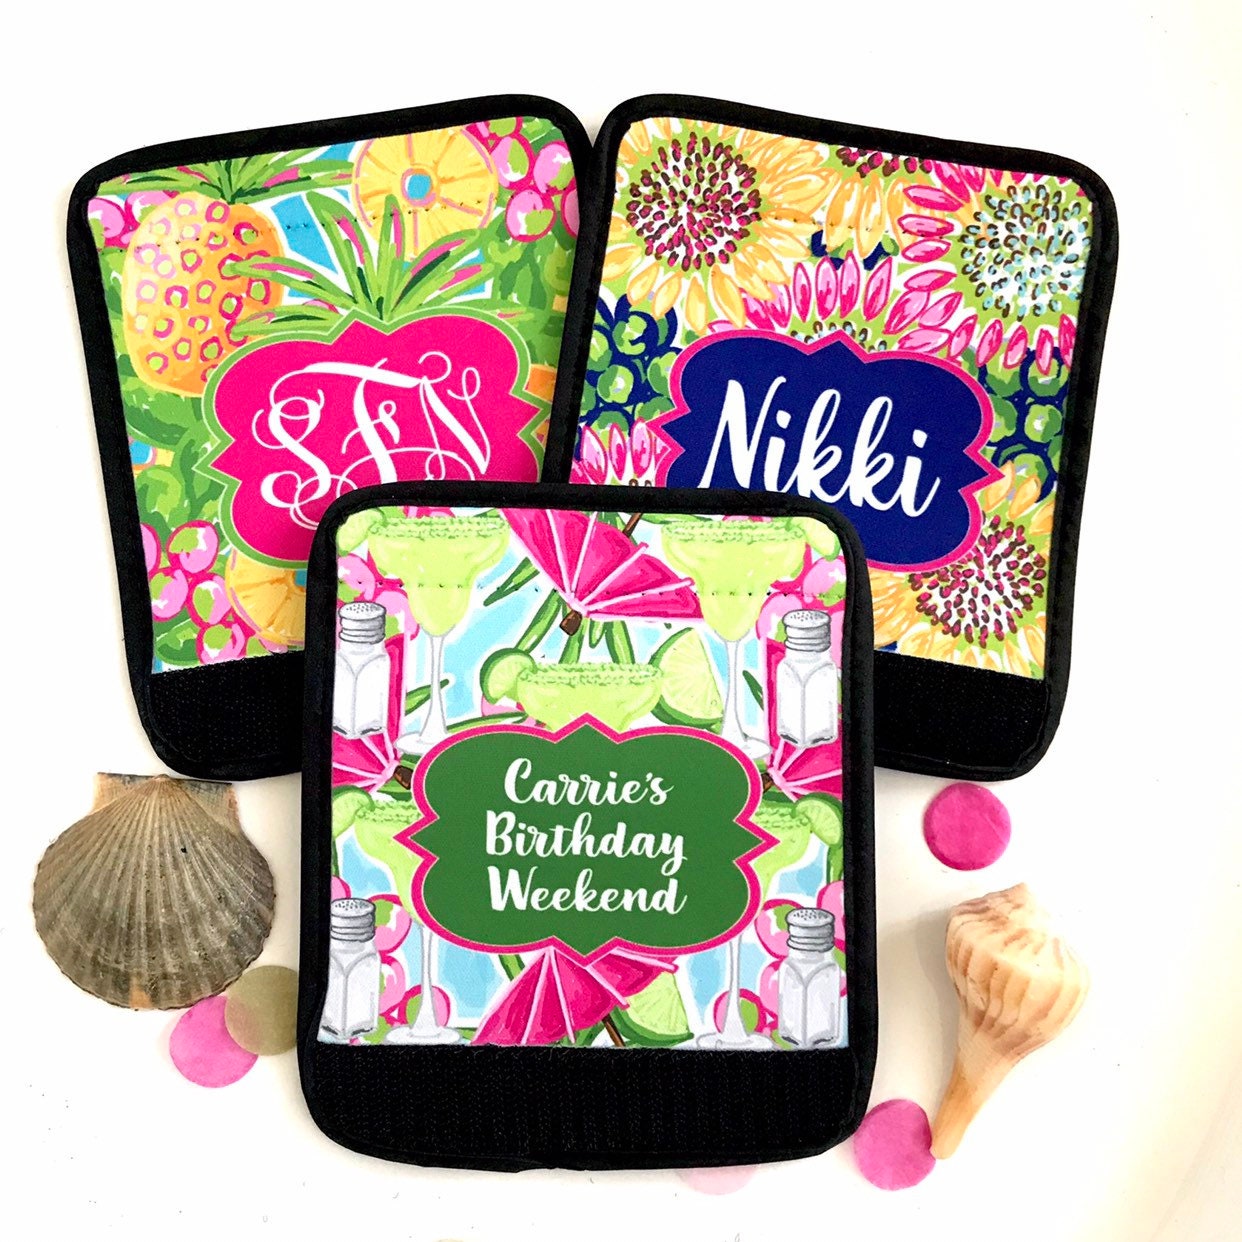 Neoprene luggage finder. Personalized tropical Theme favors. Great Beach Bachelorette gifts! Beach themed Party favors.